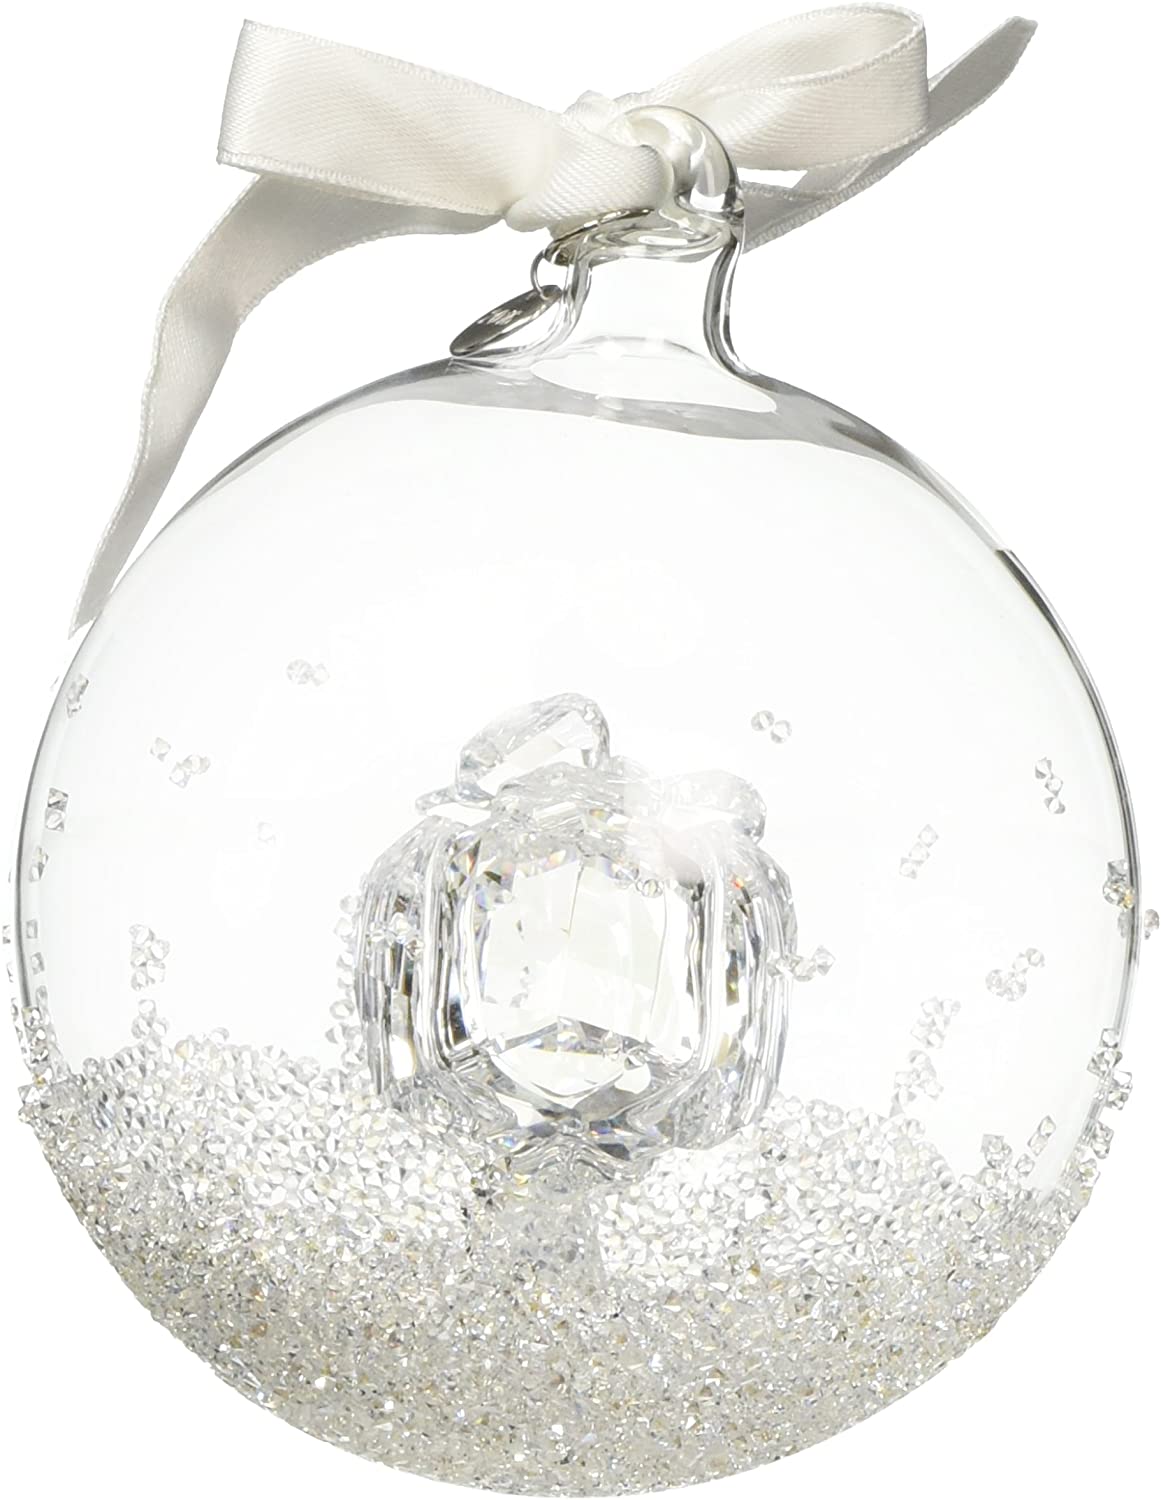 Swarovski Annual Edition 2016 Ornaments Christmas Bauble 3 5/8 Inch x 3 1/8 Inch x 3 1/8 Inch Colourless